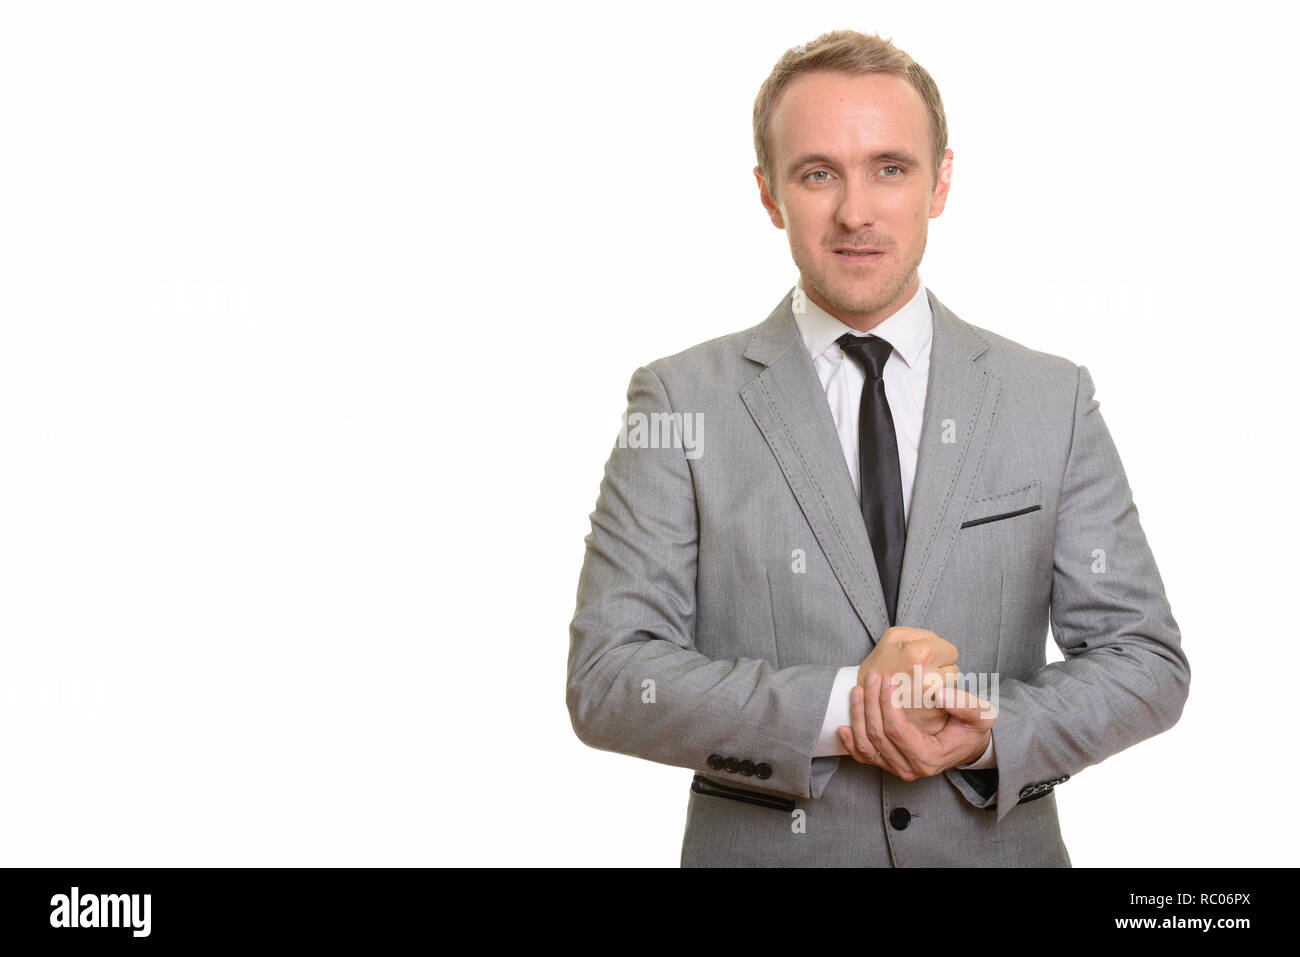 Handsome Caucasian businessman giving motivation isolated against white background Stock Photo